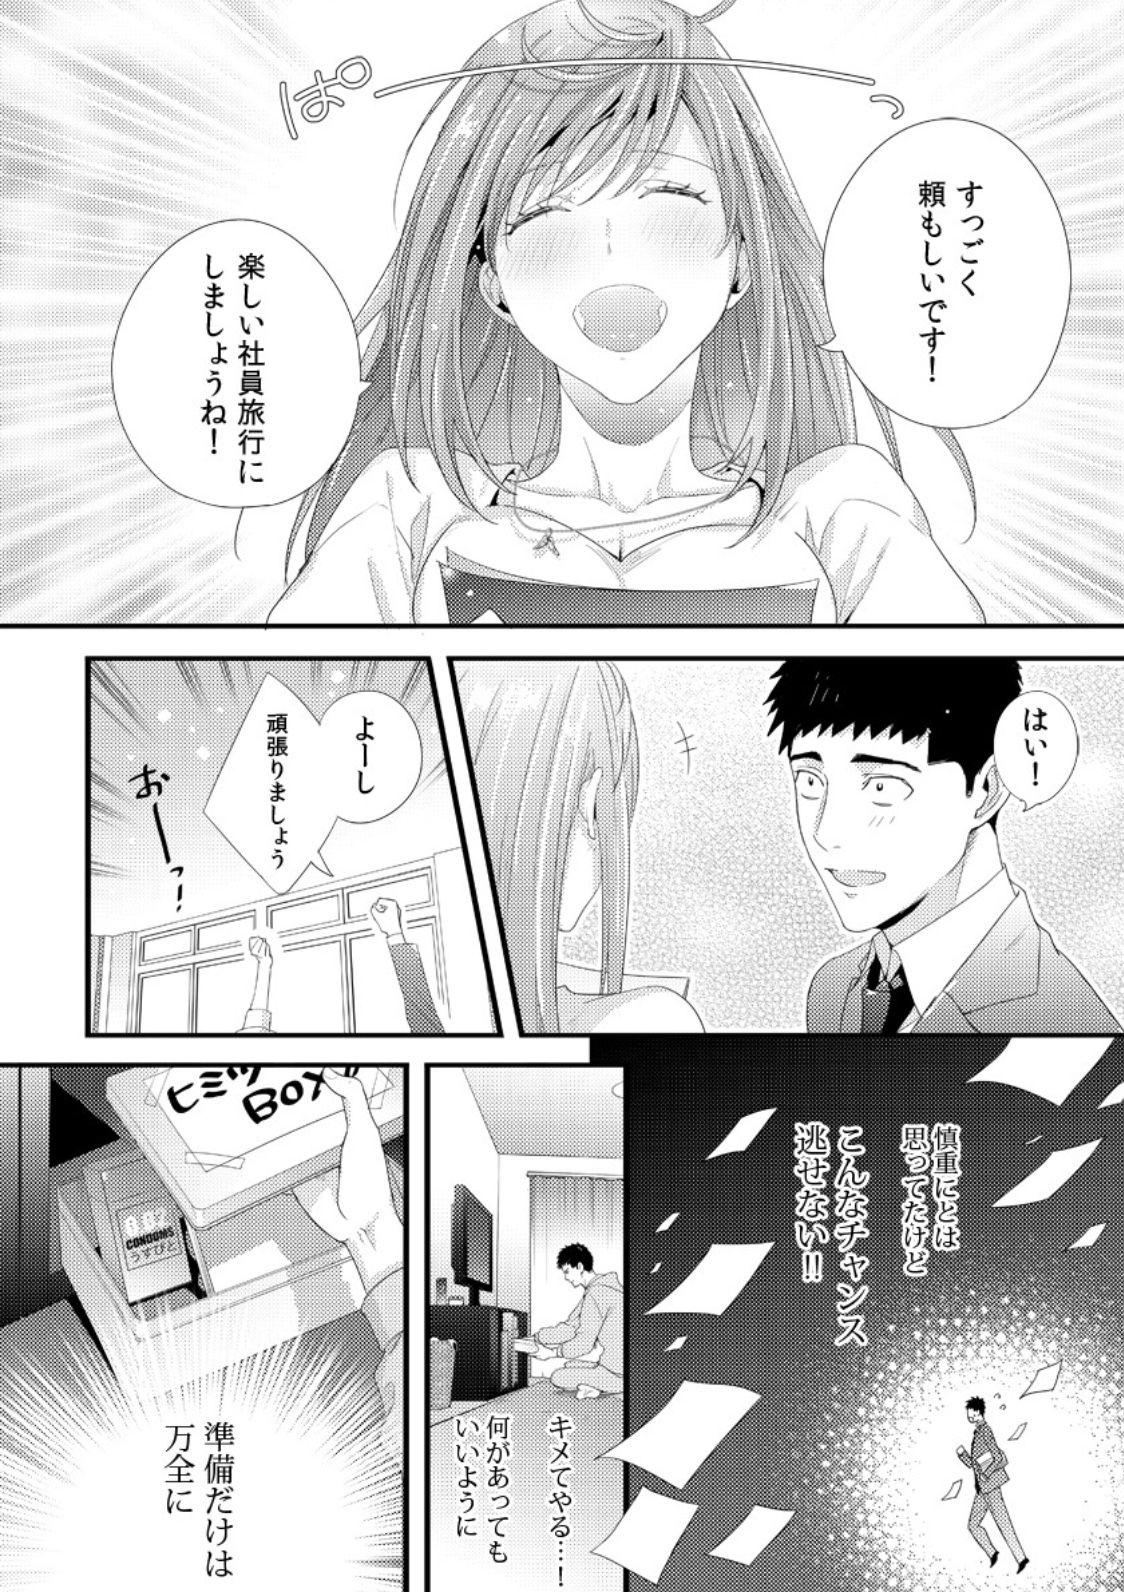 Please Let Me Hold You Futaba-San! Ch. 1-4 7